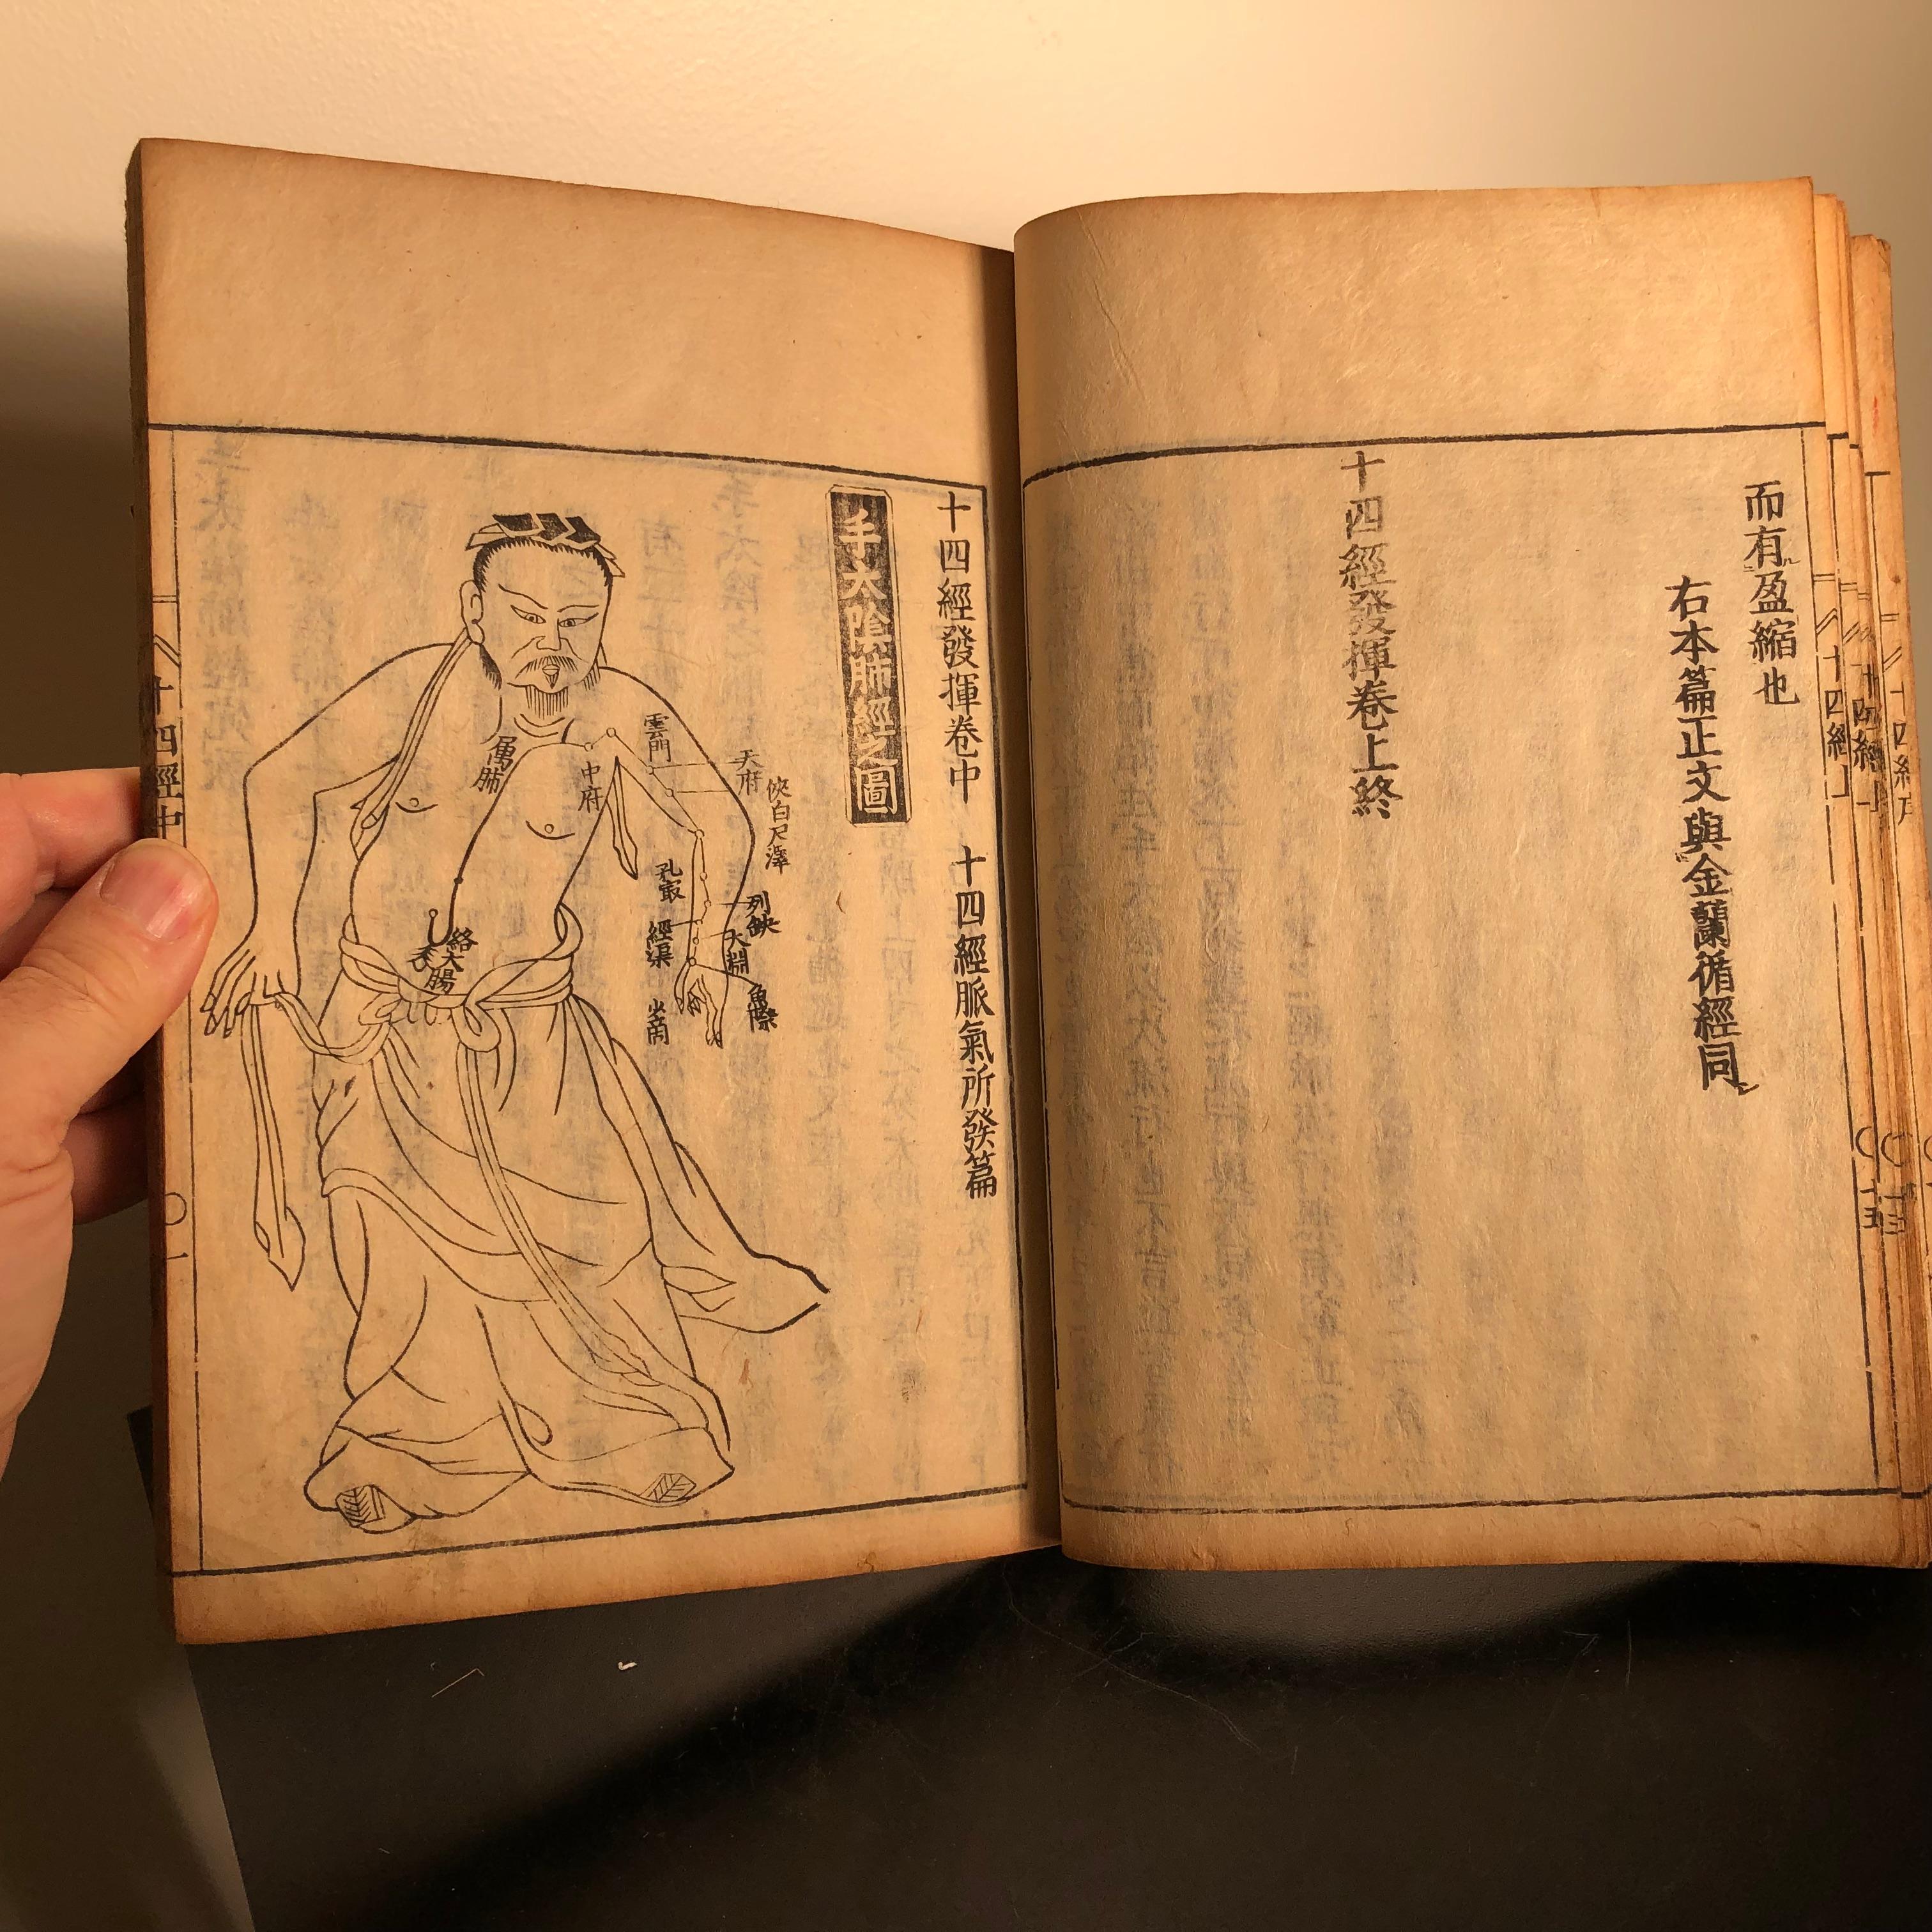 Important Acupuncture Japanese Antique Woodblock Guide Book, 19th Century Prints 9